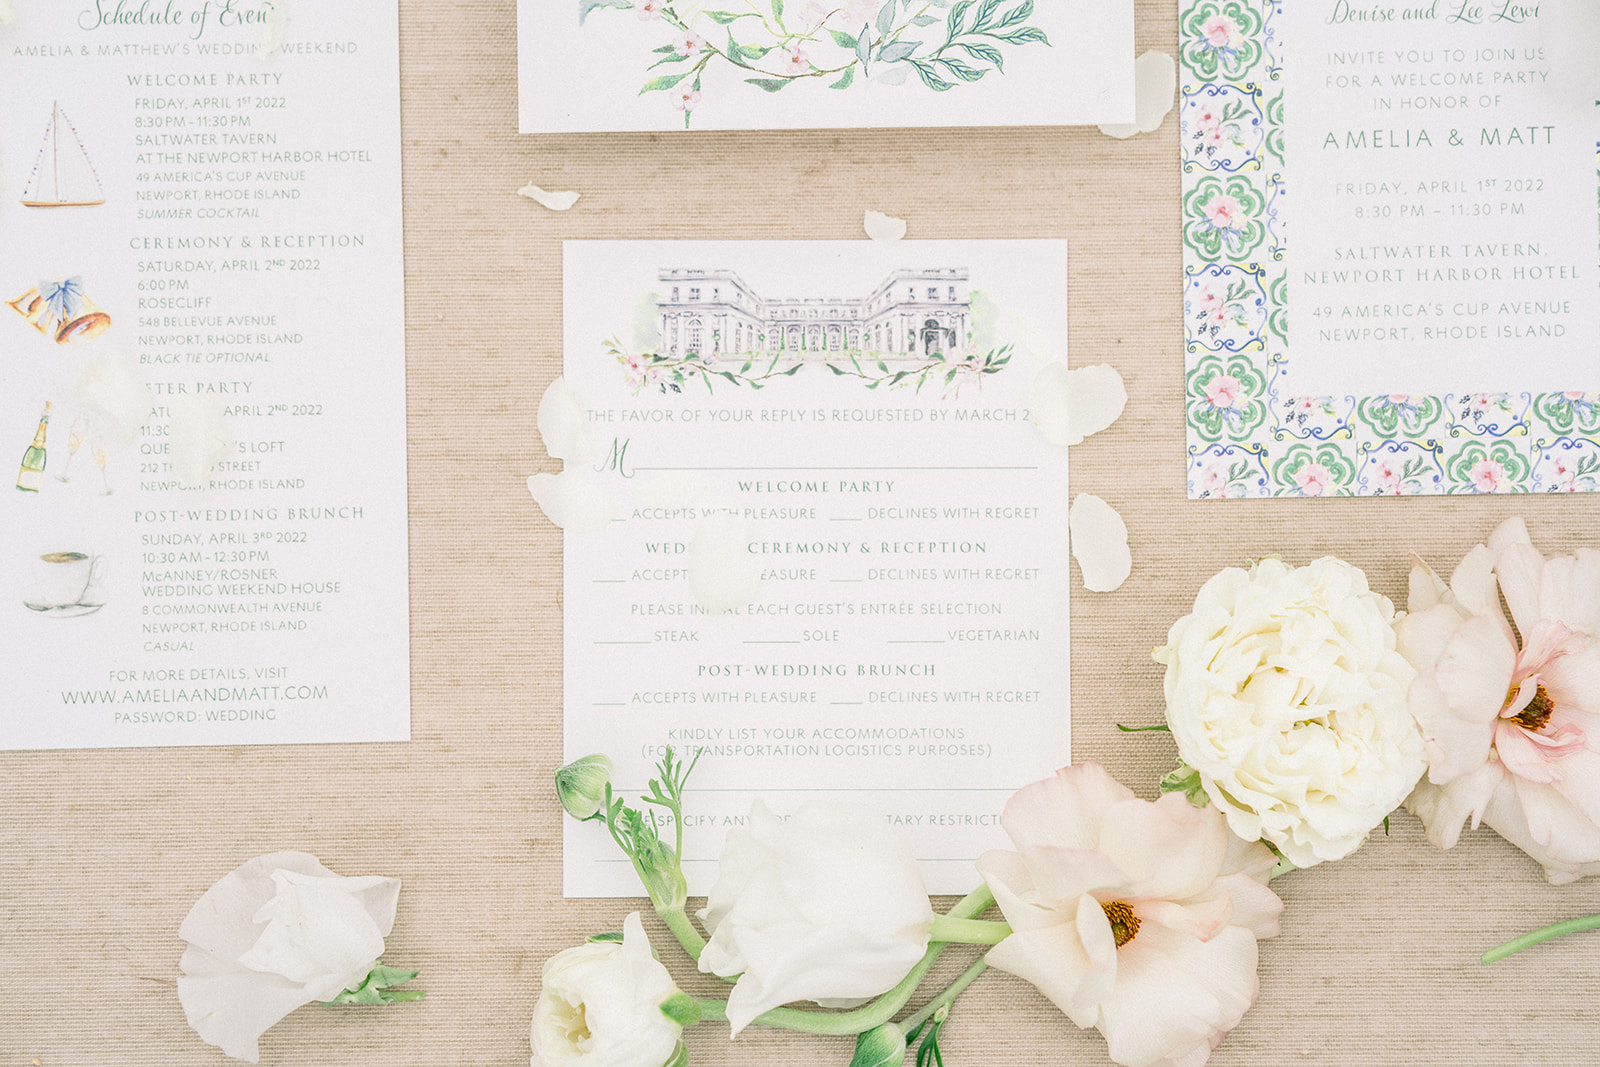 Wedding vows stationery on a vintage chair, Sunstone Winery wedding, captured by Southern California photographer